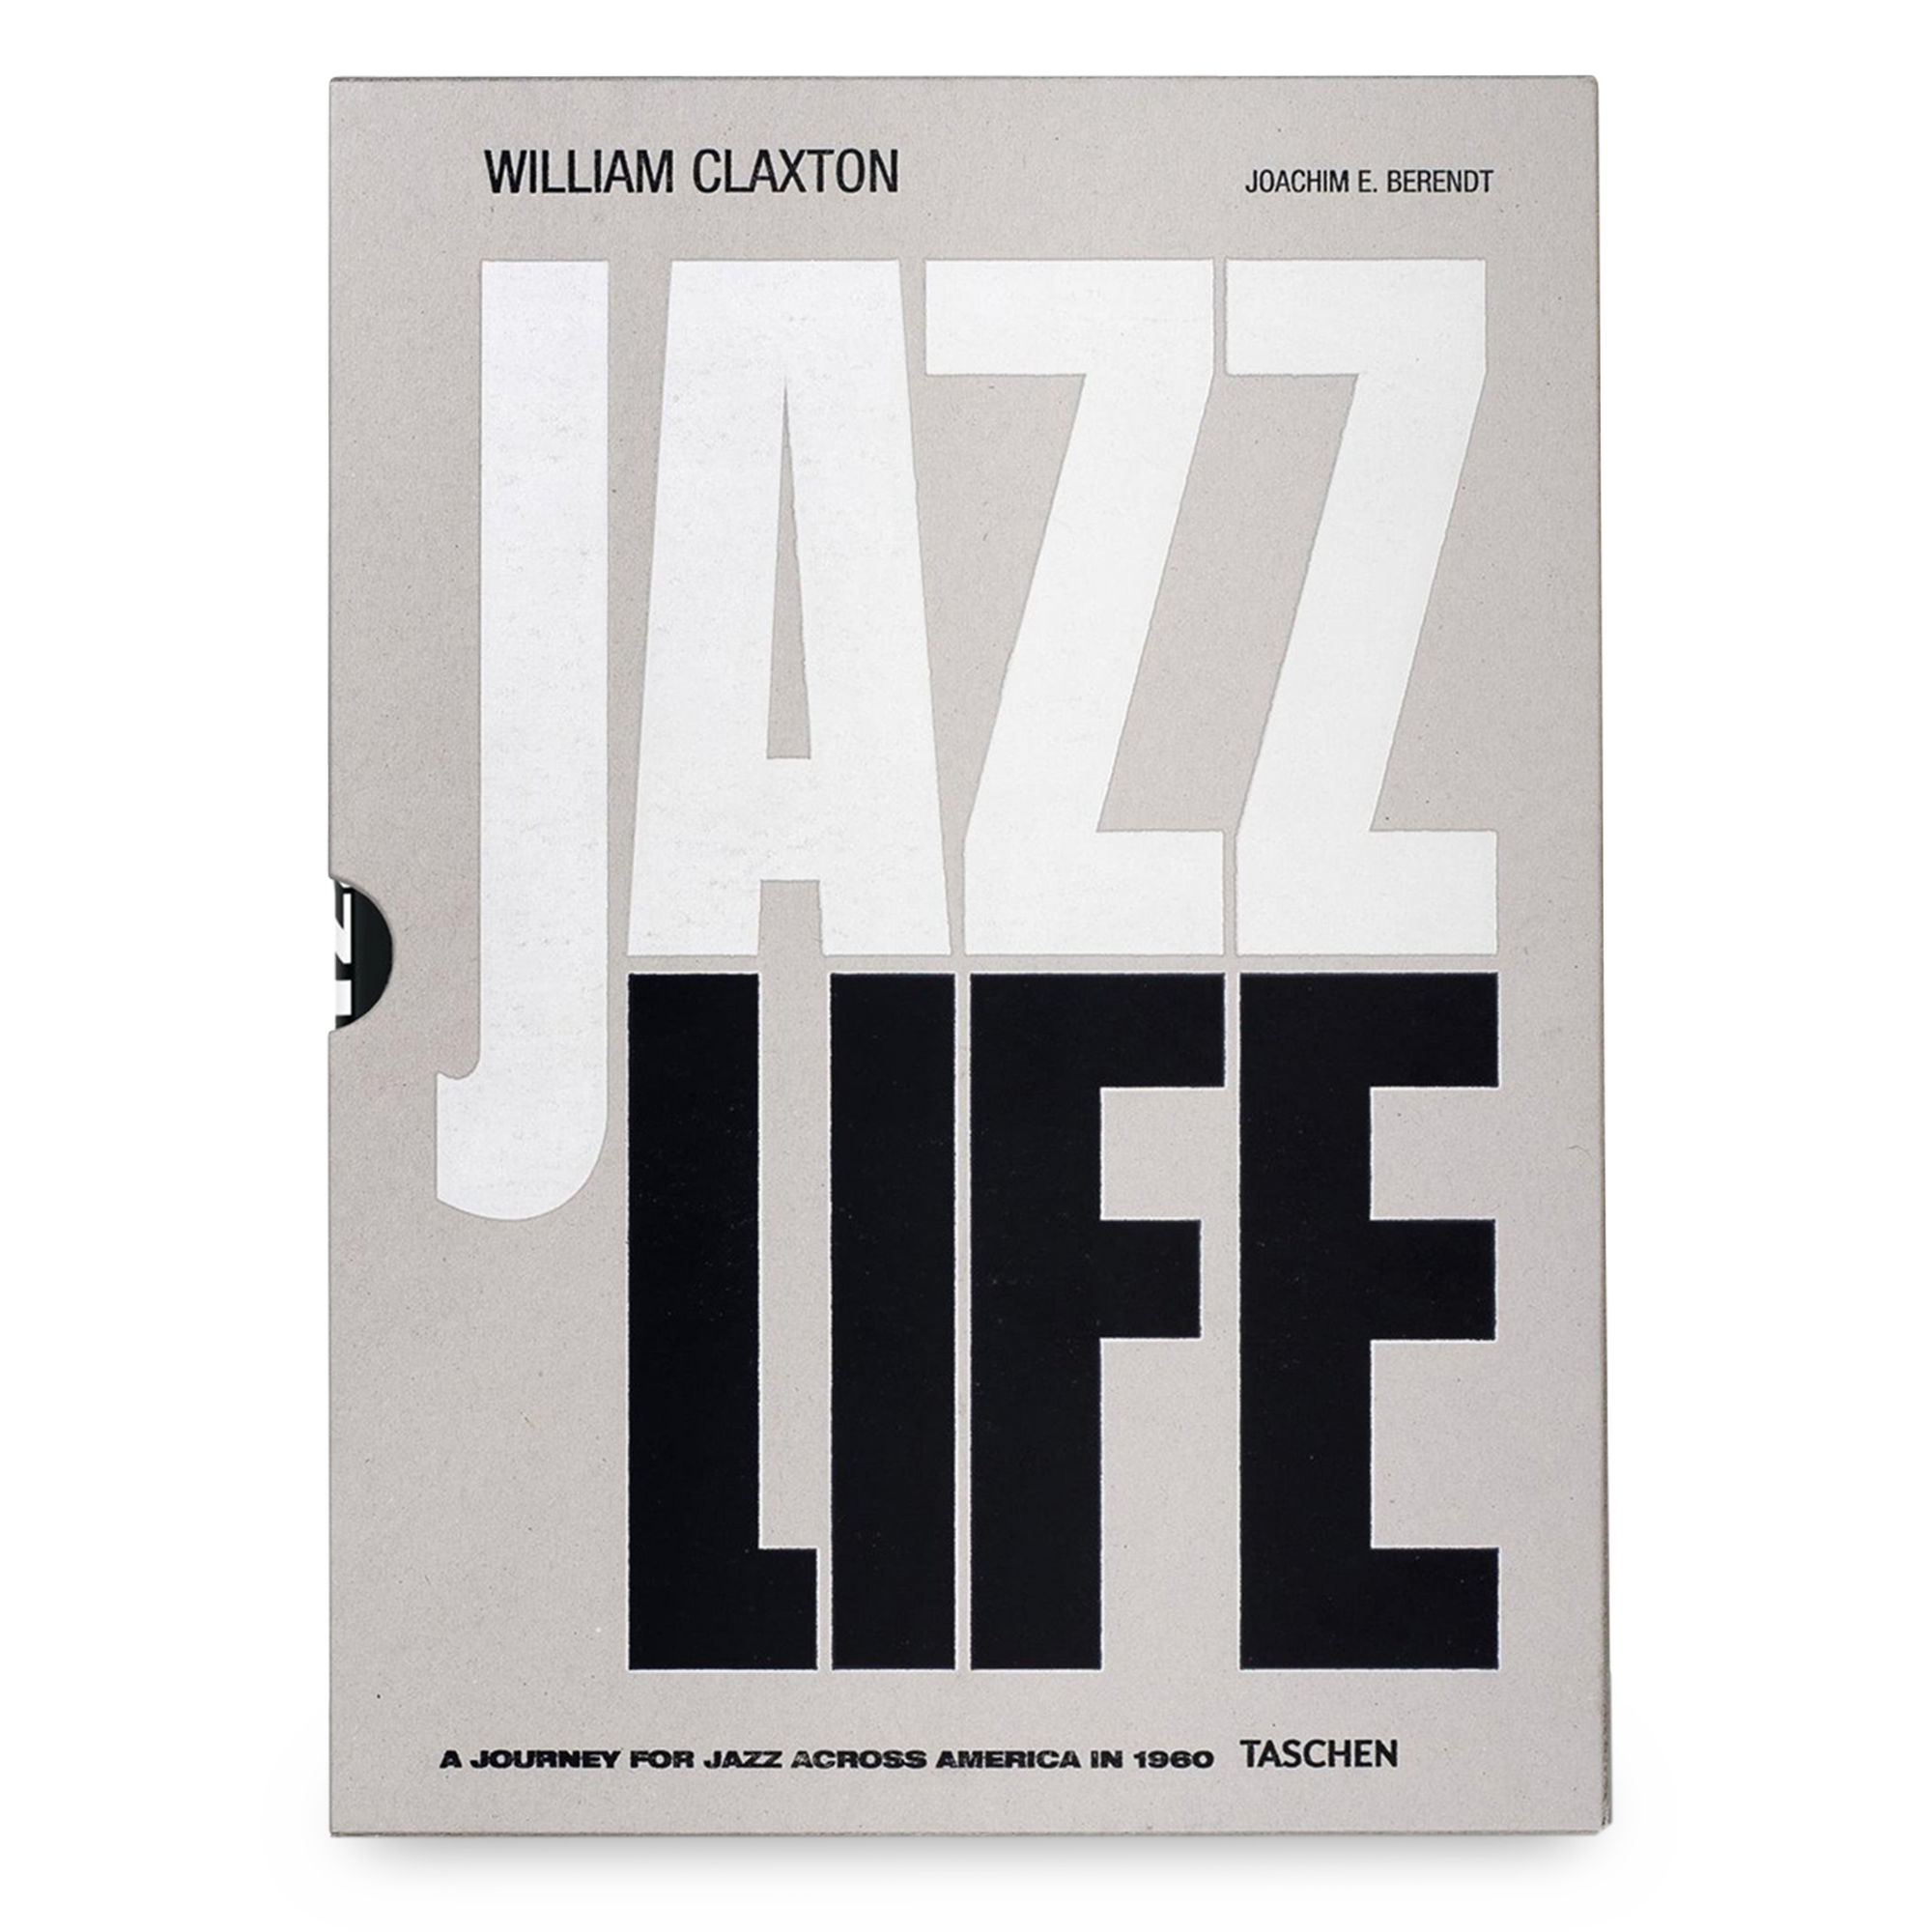 In 1960, photographer William Claxton and noted musicologist Joachim Berendt traveled the United States hot on the trail of jazz.